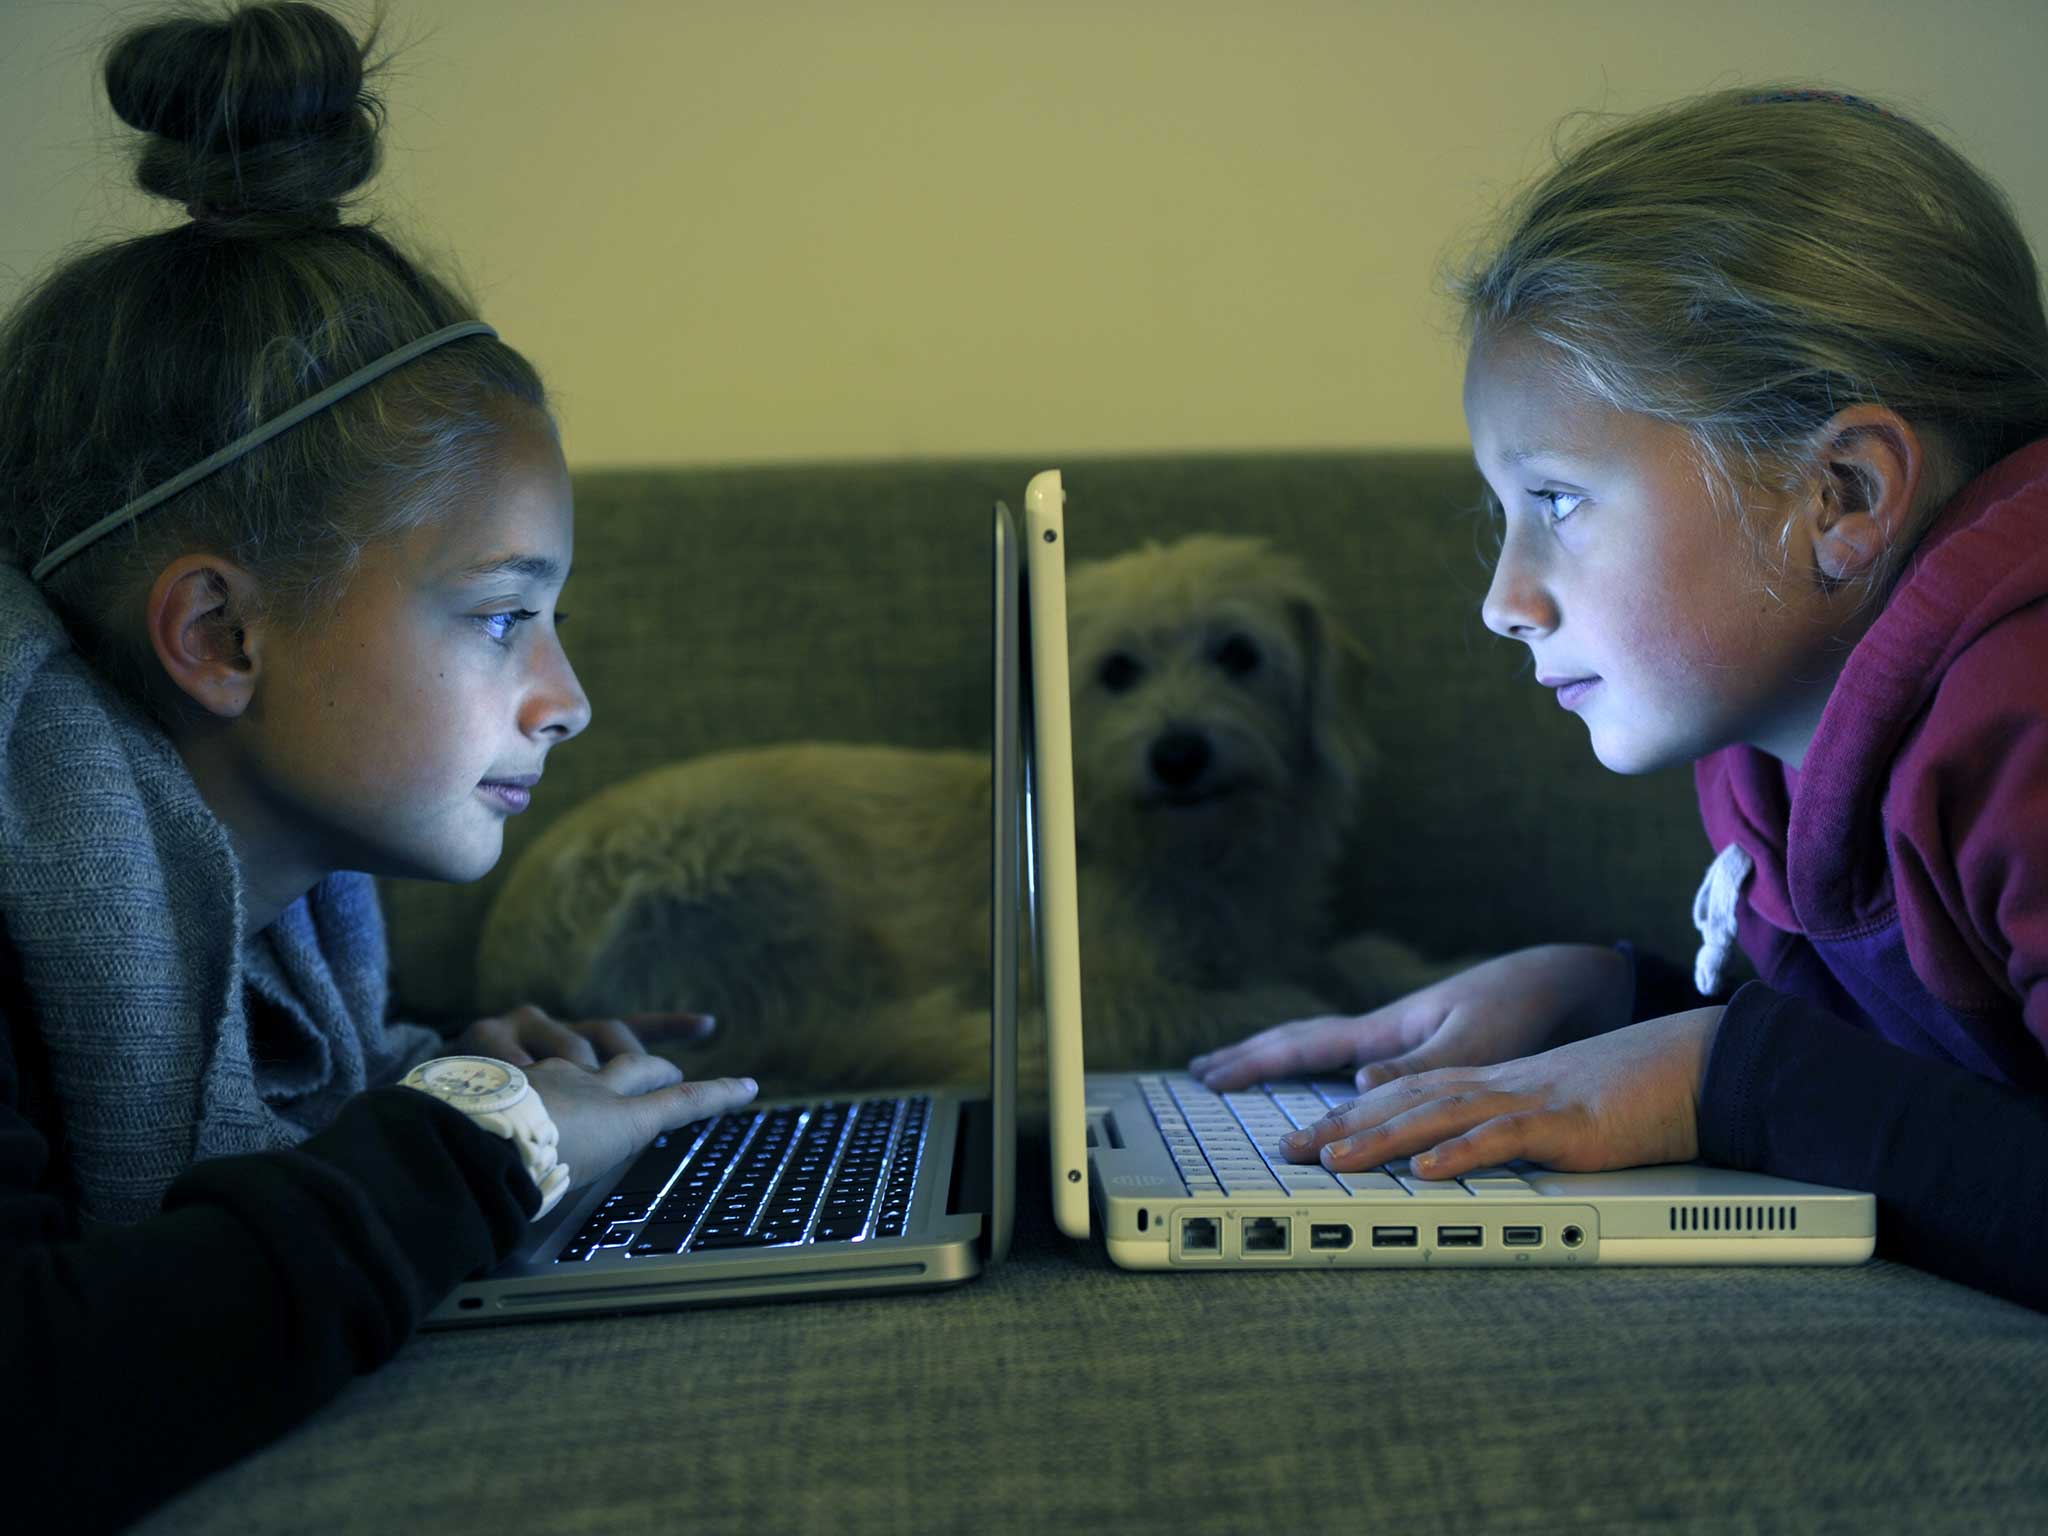 Parents' fear of the internet is understandable, but is it realistic to hide children from it?